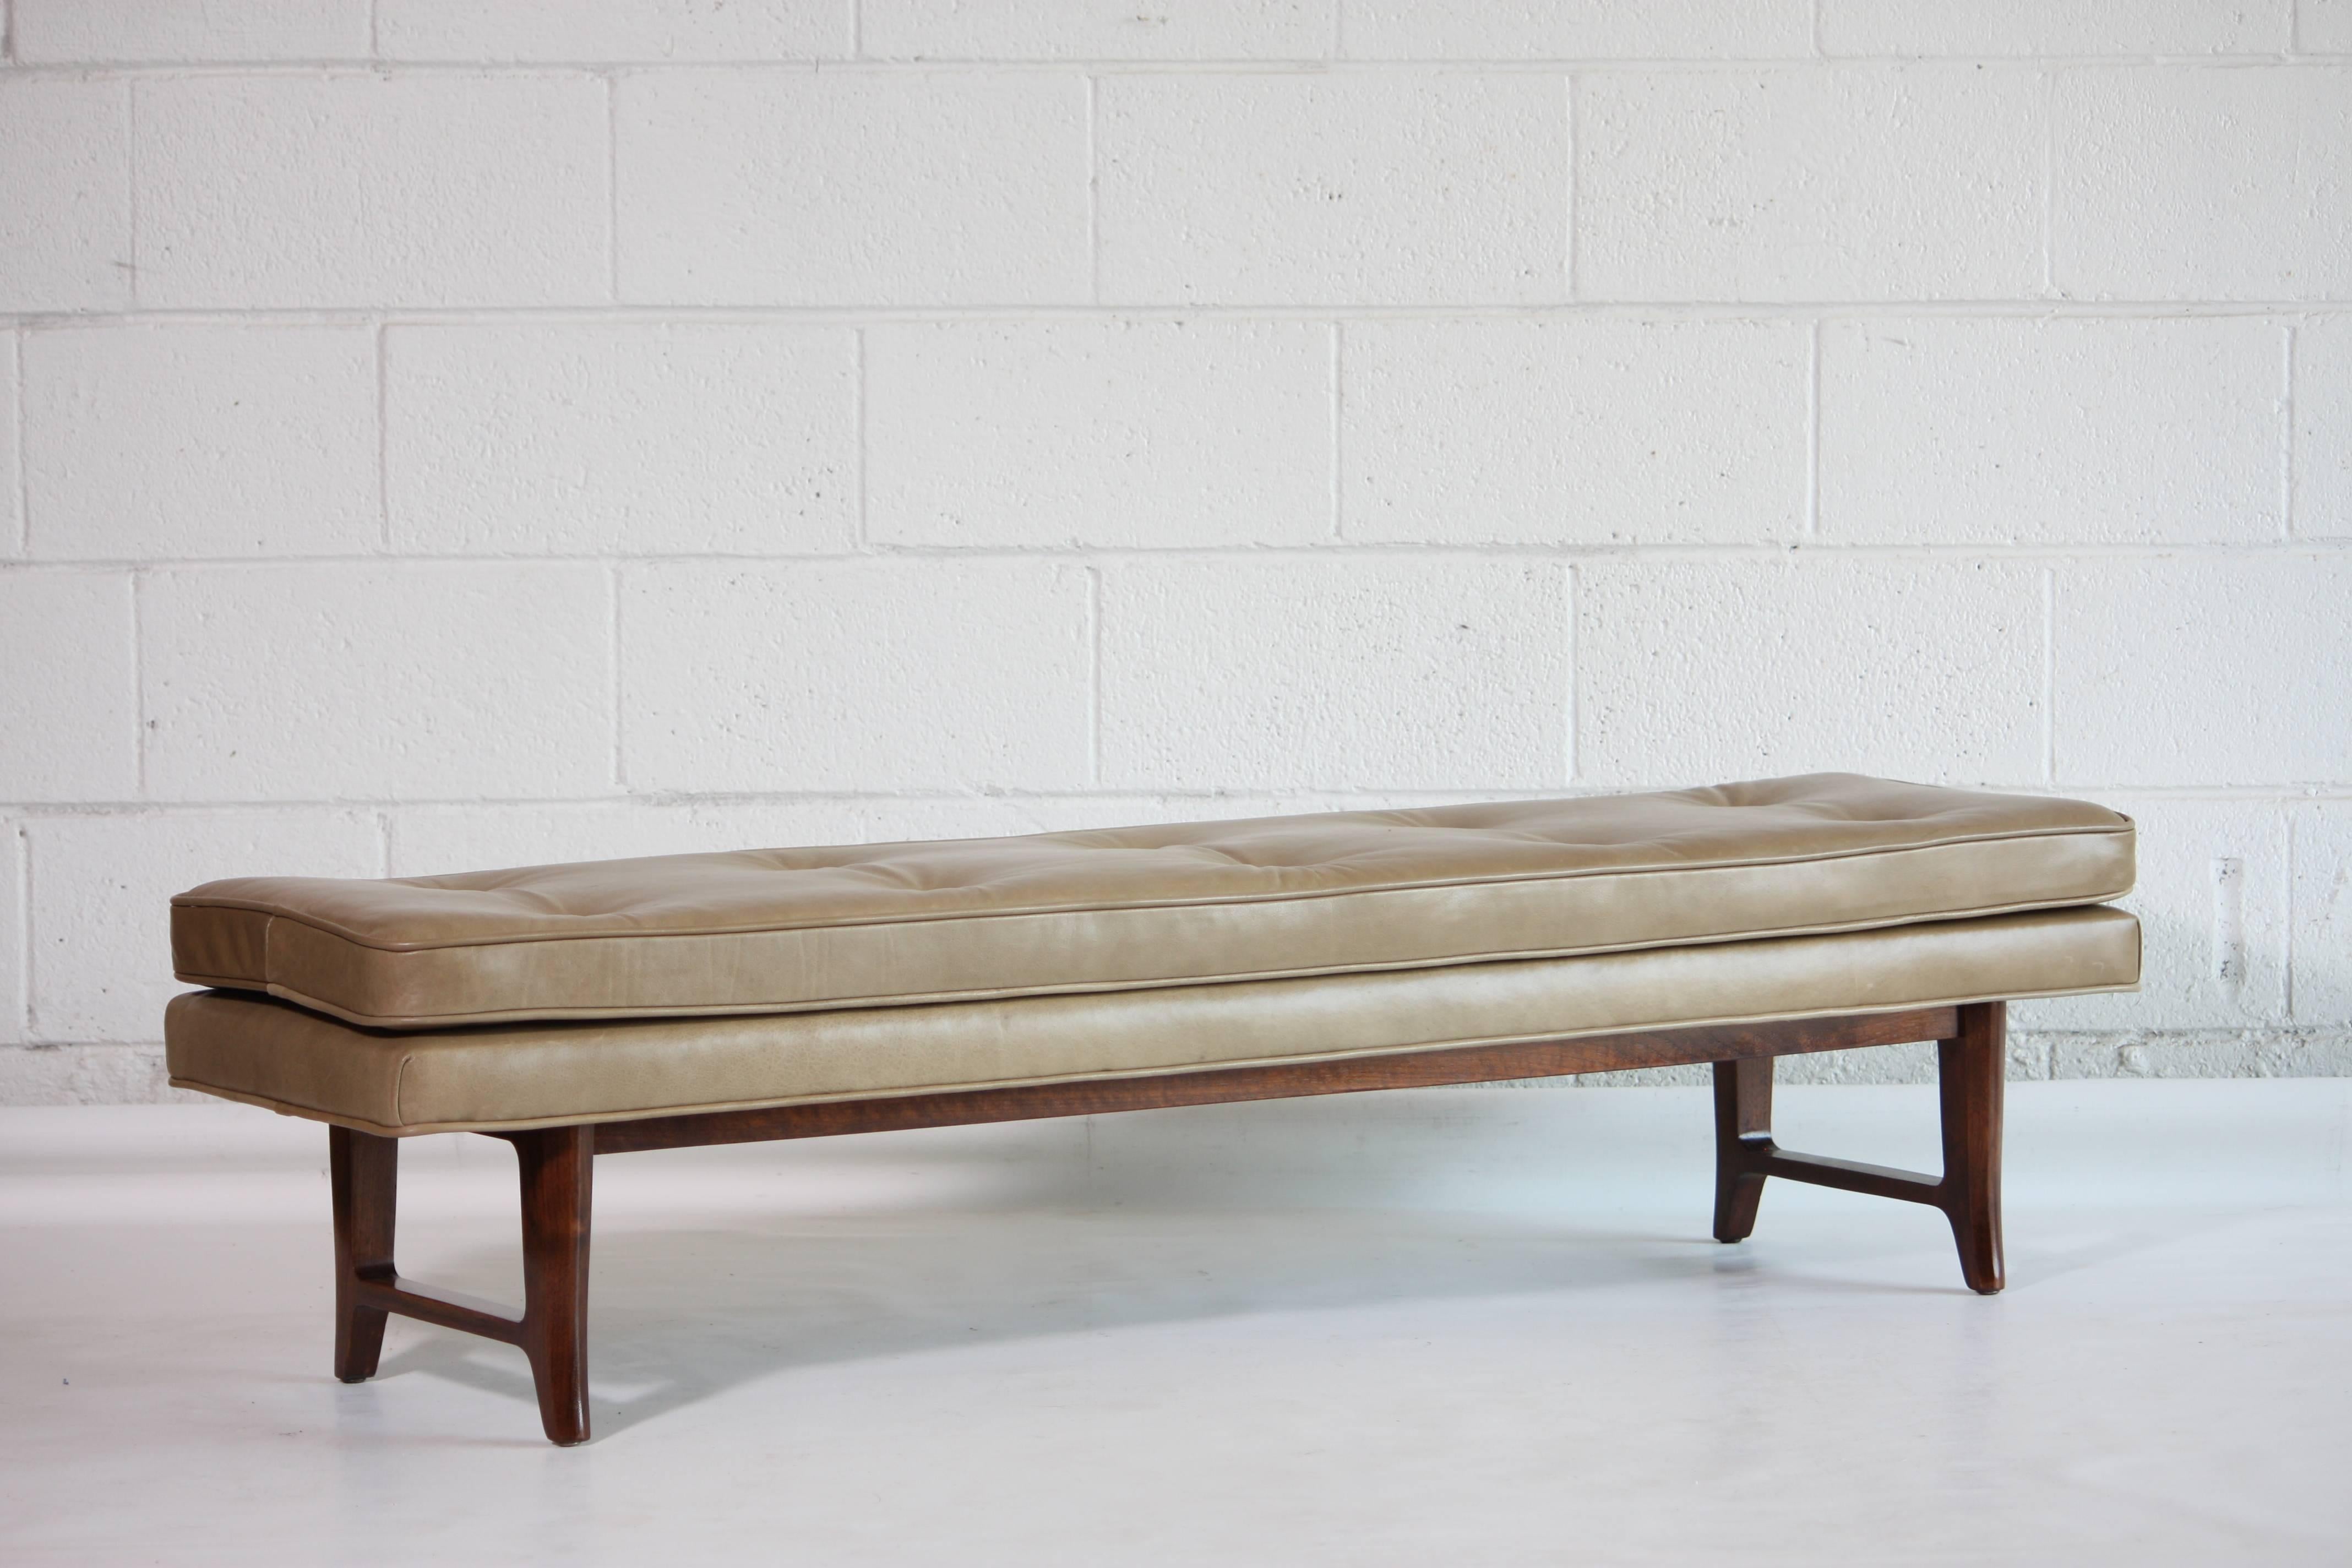 Absolutely stunning bench designed by Edward Wormley for Dunbar. This piece has been professionally refinished and reupholstered in an amazing leather hide. Retains Dunbar labeling.